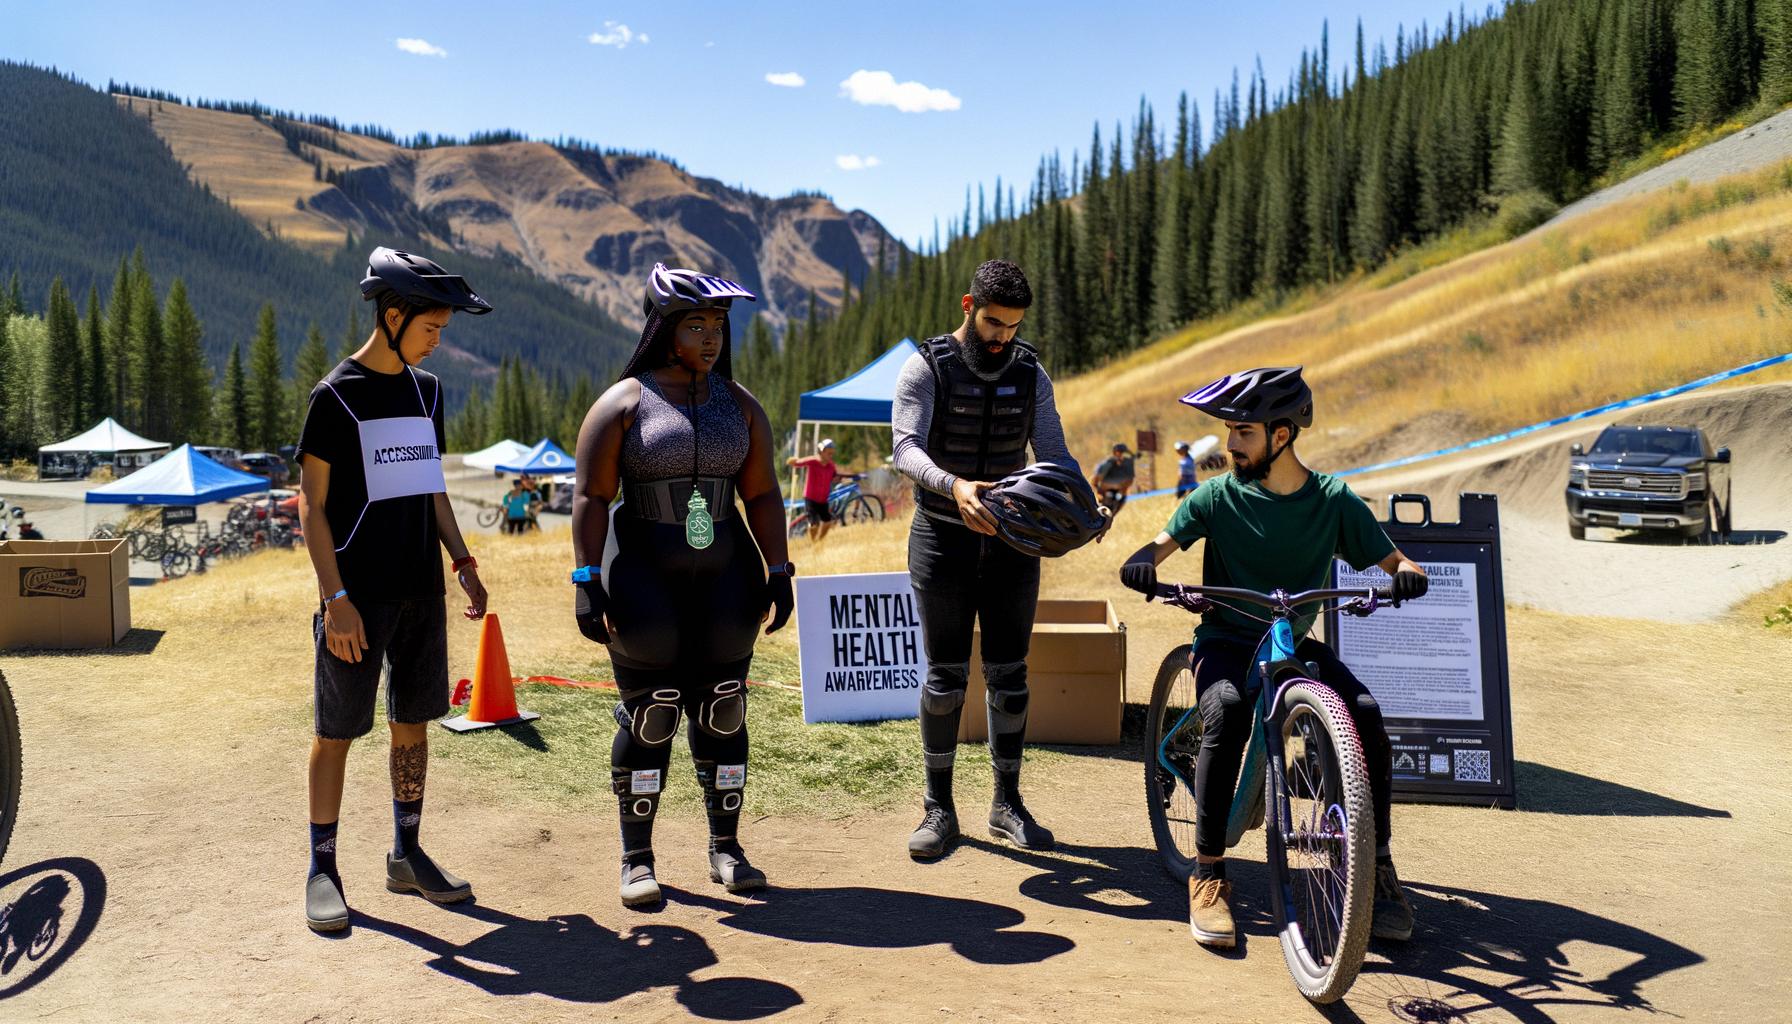 Mountain biking community focuses on mental health, accessibility, and competition Balanced News